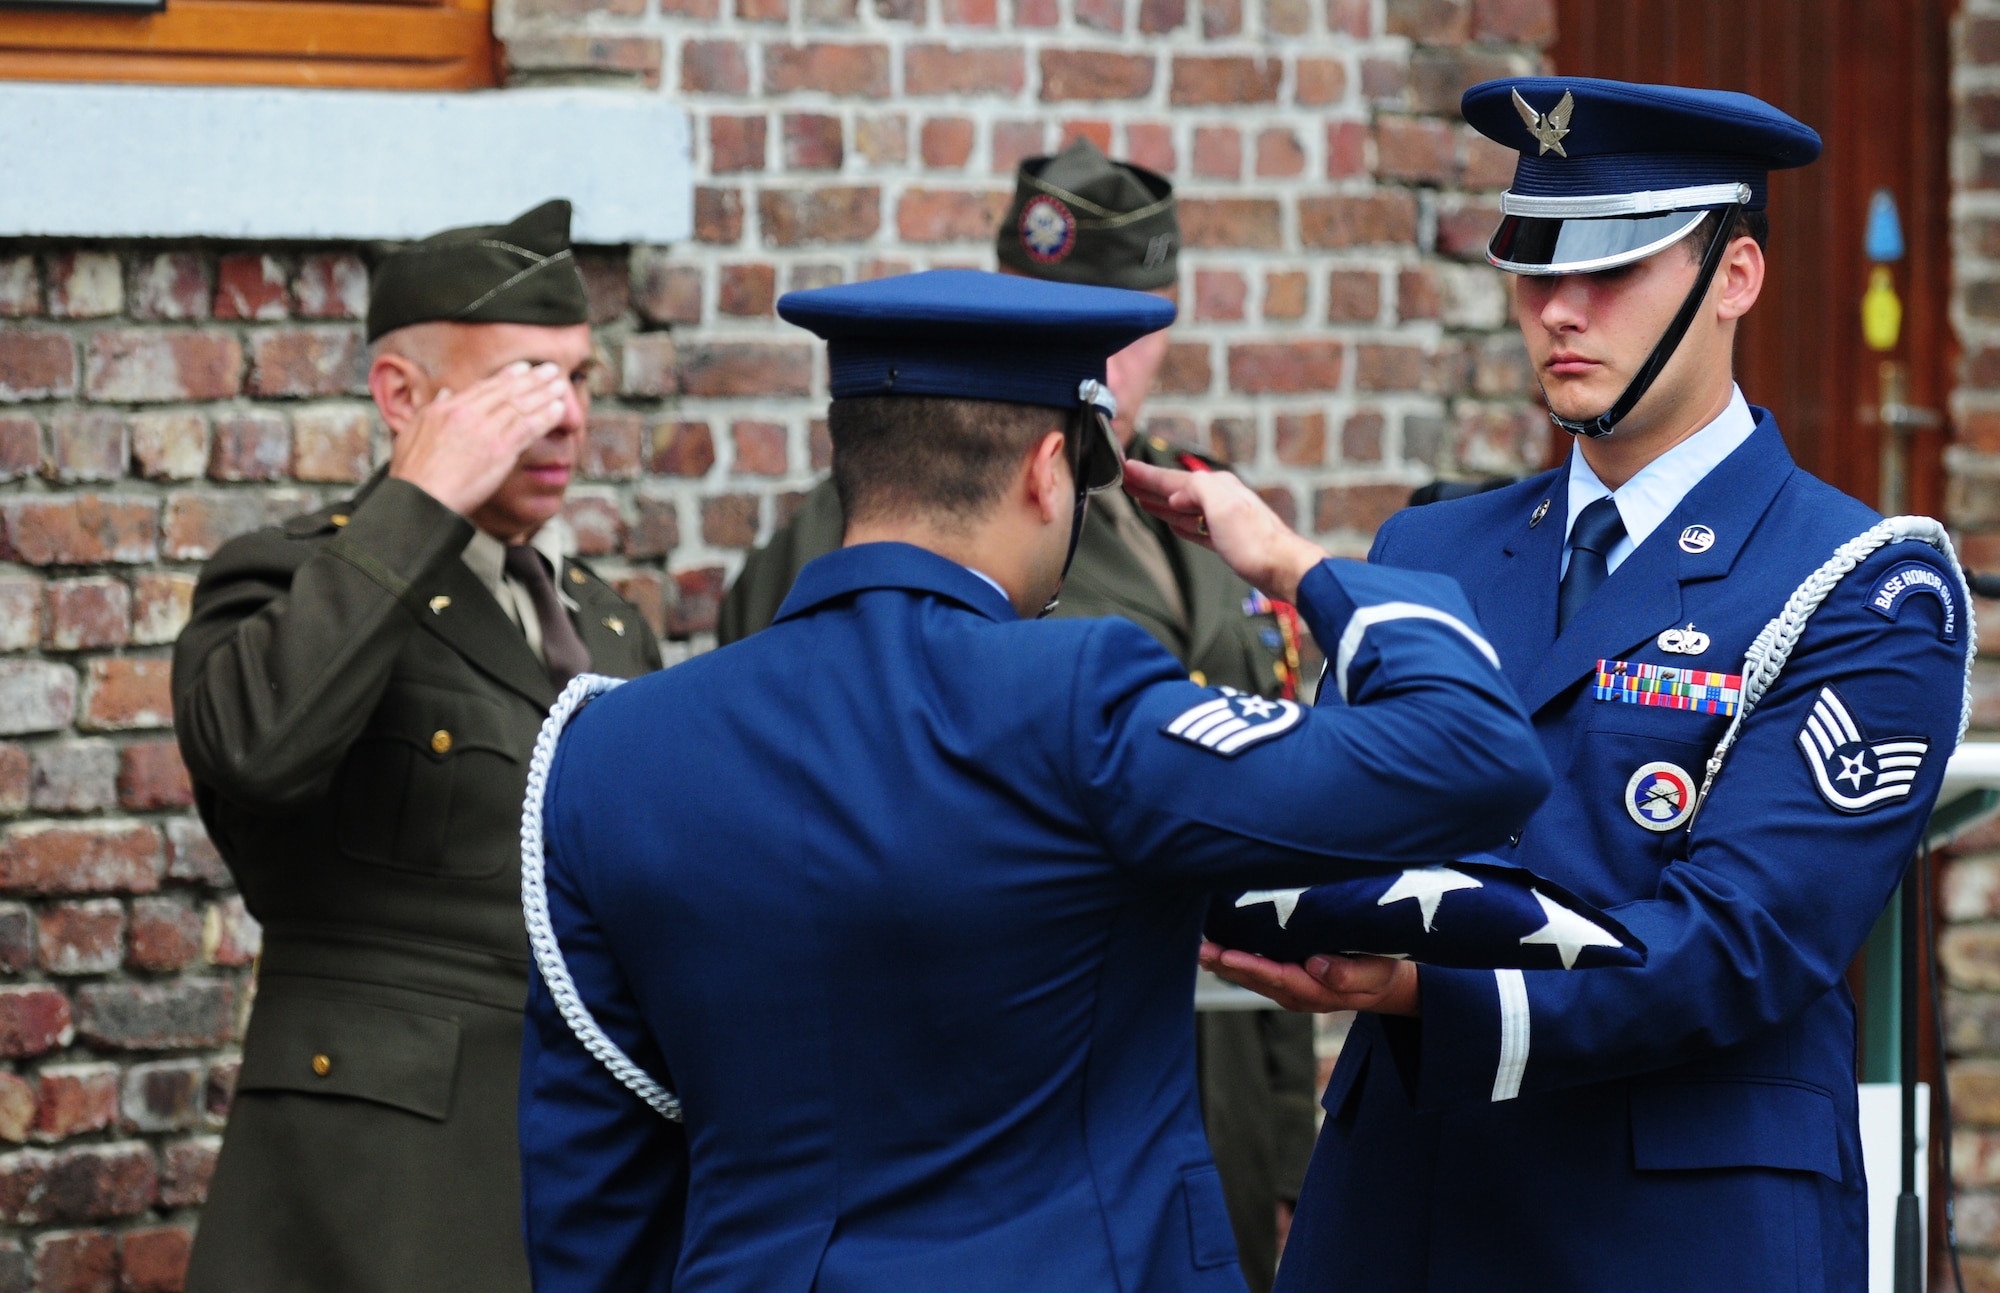 BORLO, Belgium – Staff Sgt. Victor Estupinan, 52nd Fighter Wing Honor Guard member, salutes the American Flag held by teammate Staff Sgt. Charles Lopez after performing a flag-folding ceremony during a Belgian 9-11 memorial ceremony here Sept. 11. U.S. service members and Belgian World War II Honor Guard Team members, along with the local community, participated in this ceremony as part of the Belgian Open Monument Day in remembrance of the victims of the Sept. 11, 2001 terrorist attacks on the United States. (U.S. Air Force photo/Airman 1st Class Matthew B. Fredericks)